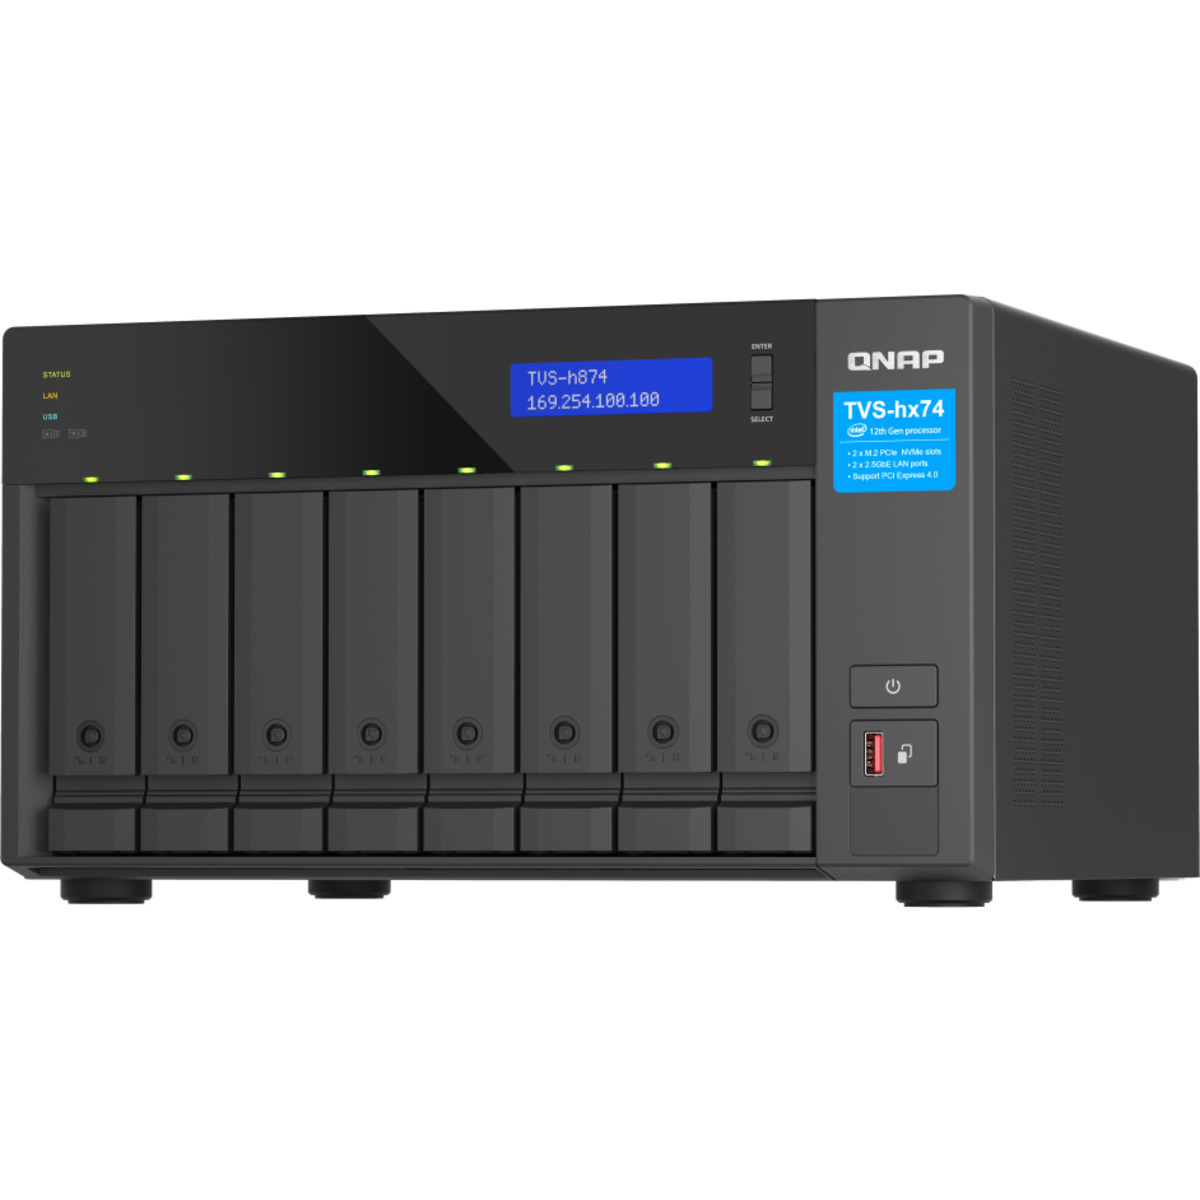 buy QNAP TVS-h874 Core i7 176tb Desktop NAS - Network Attached Storage Device 8x22000gb Western Digital Ultrastar HC570 WUH722222ALE6L4 3.5 7200rpm SATA 6Gb/s HDD ENTERPRISE Class Drives Installed - Burn-In Tested - nas headquarters buy network attached storage server device das new raid-5 free shipping simply usa TVS-h874 Core i7